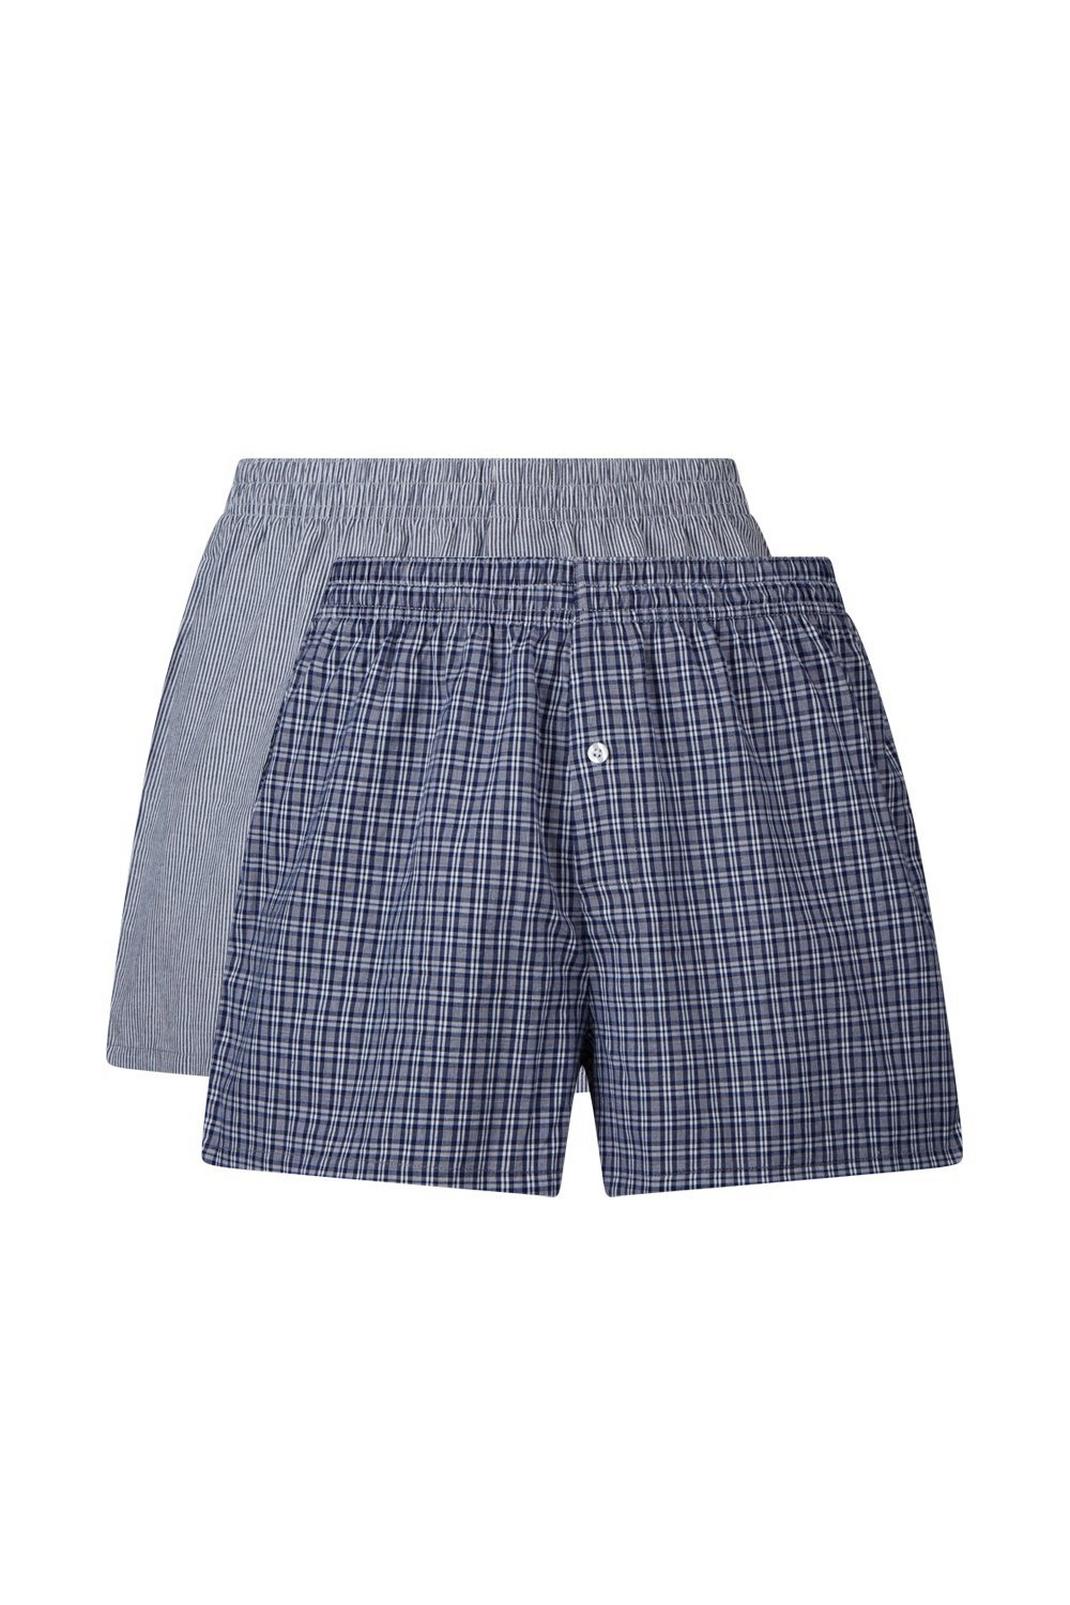 148 2 Pack Woven Navy Design Boxers  image number 1